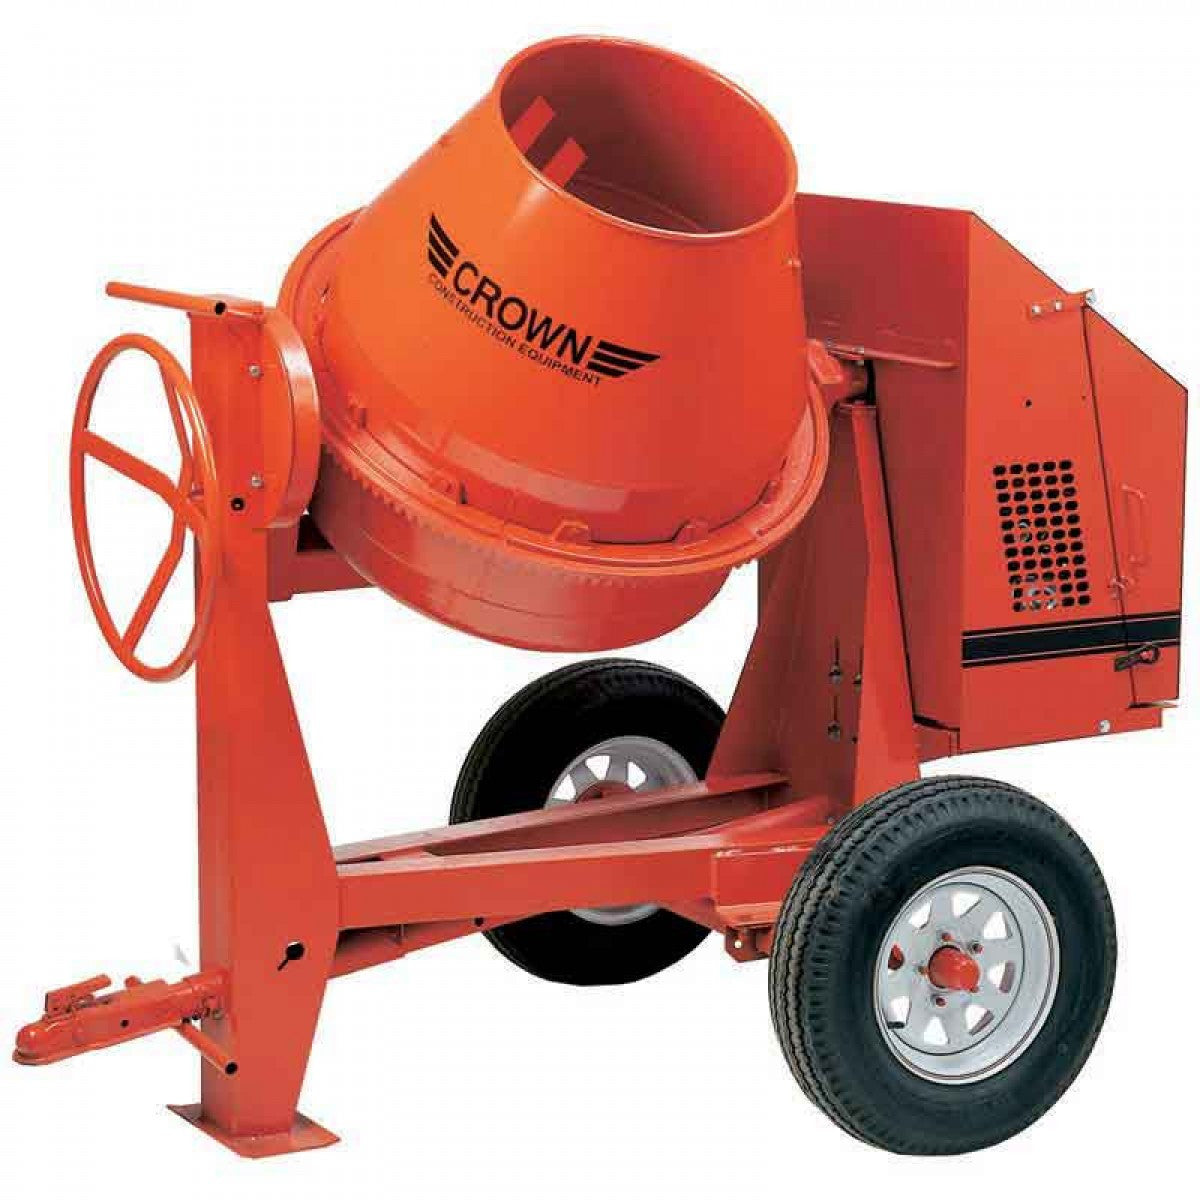 Crown C6 - 6 cu ft Concrete Mixer - FREE DEPOT SHIPPING (conditions apply) (7455345605) (7707013710040)